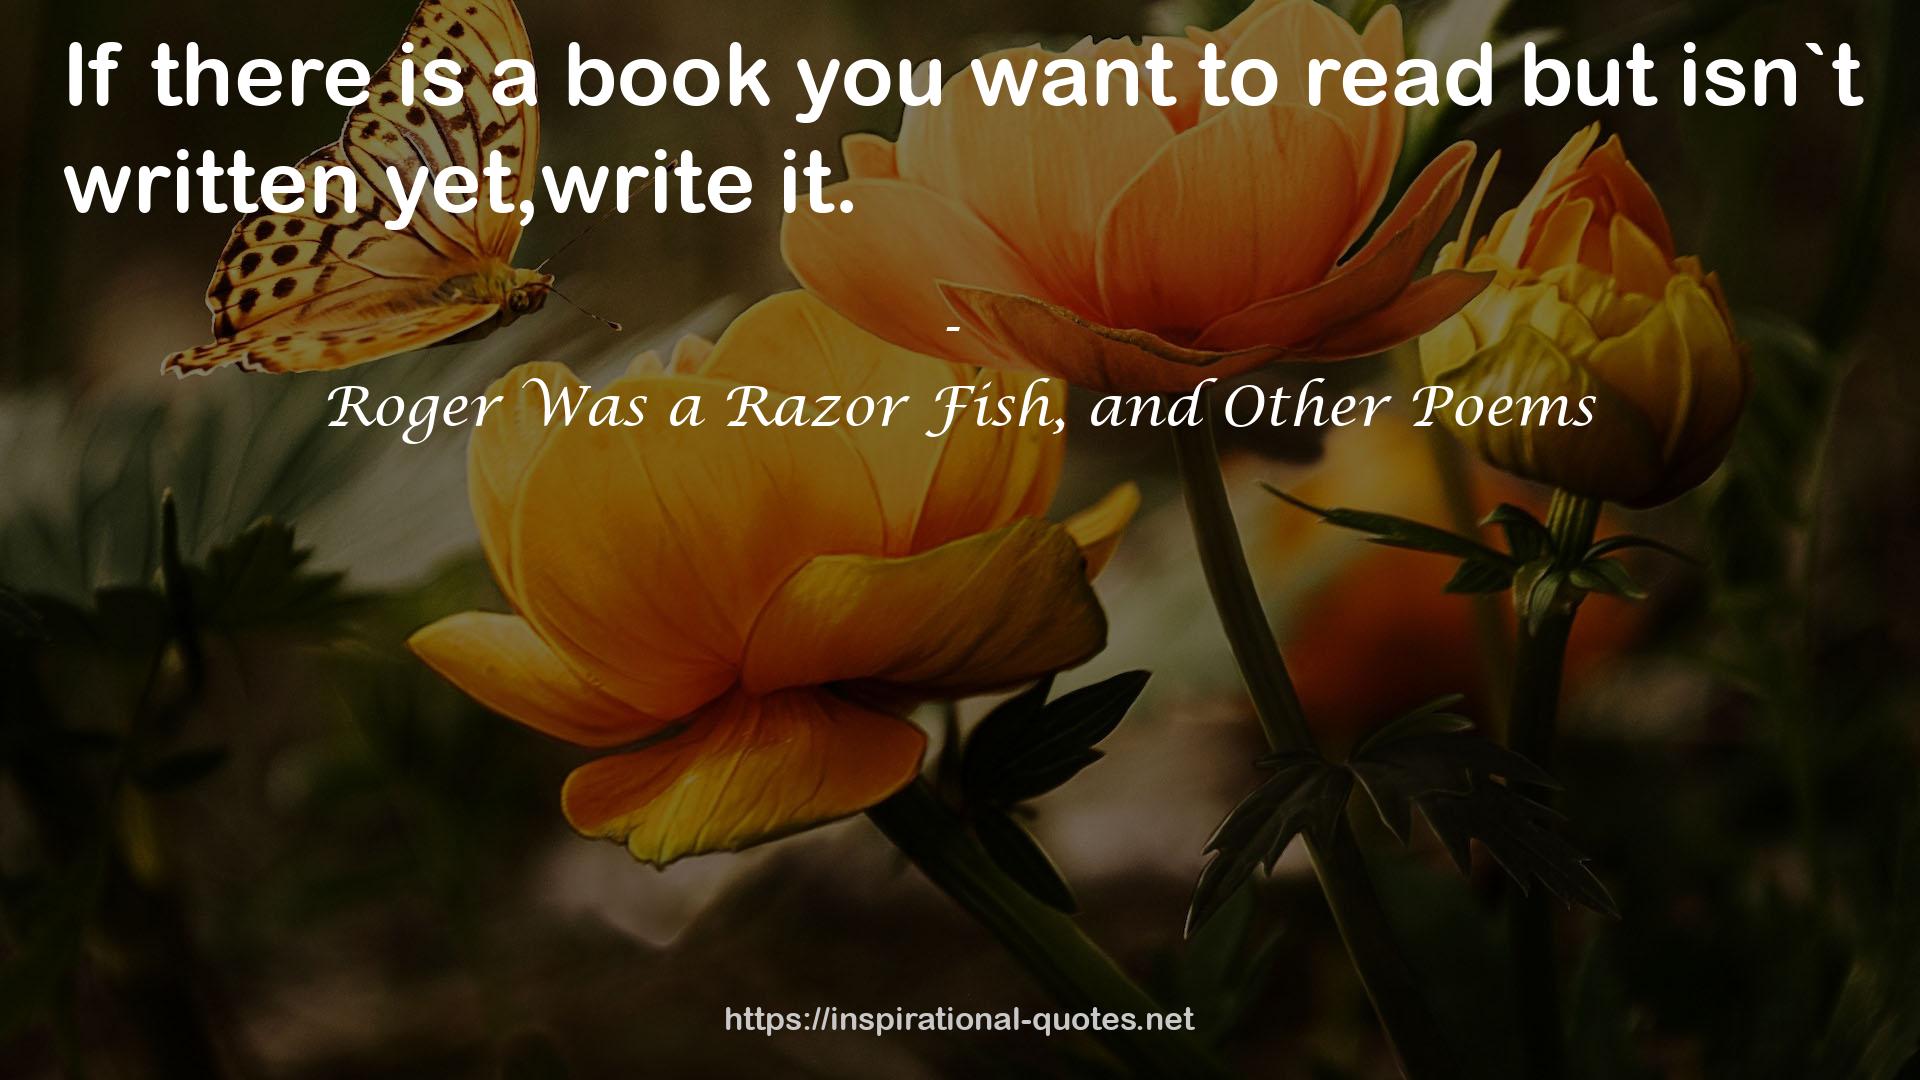 Roger Was a Razor Fish, and Other Poems QUOTES